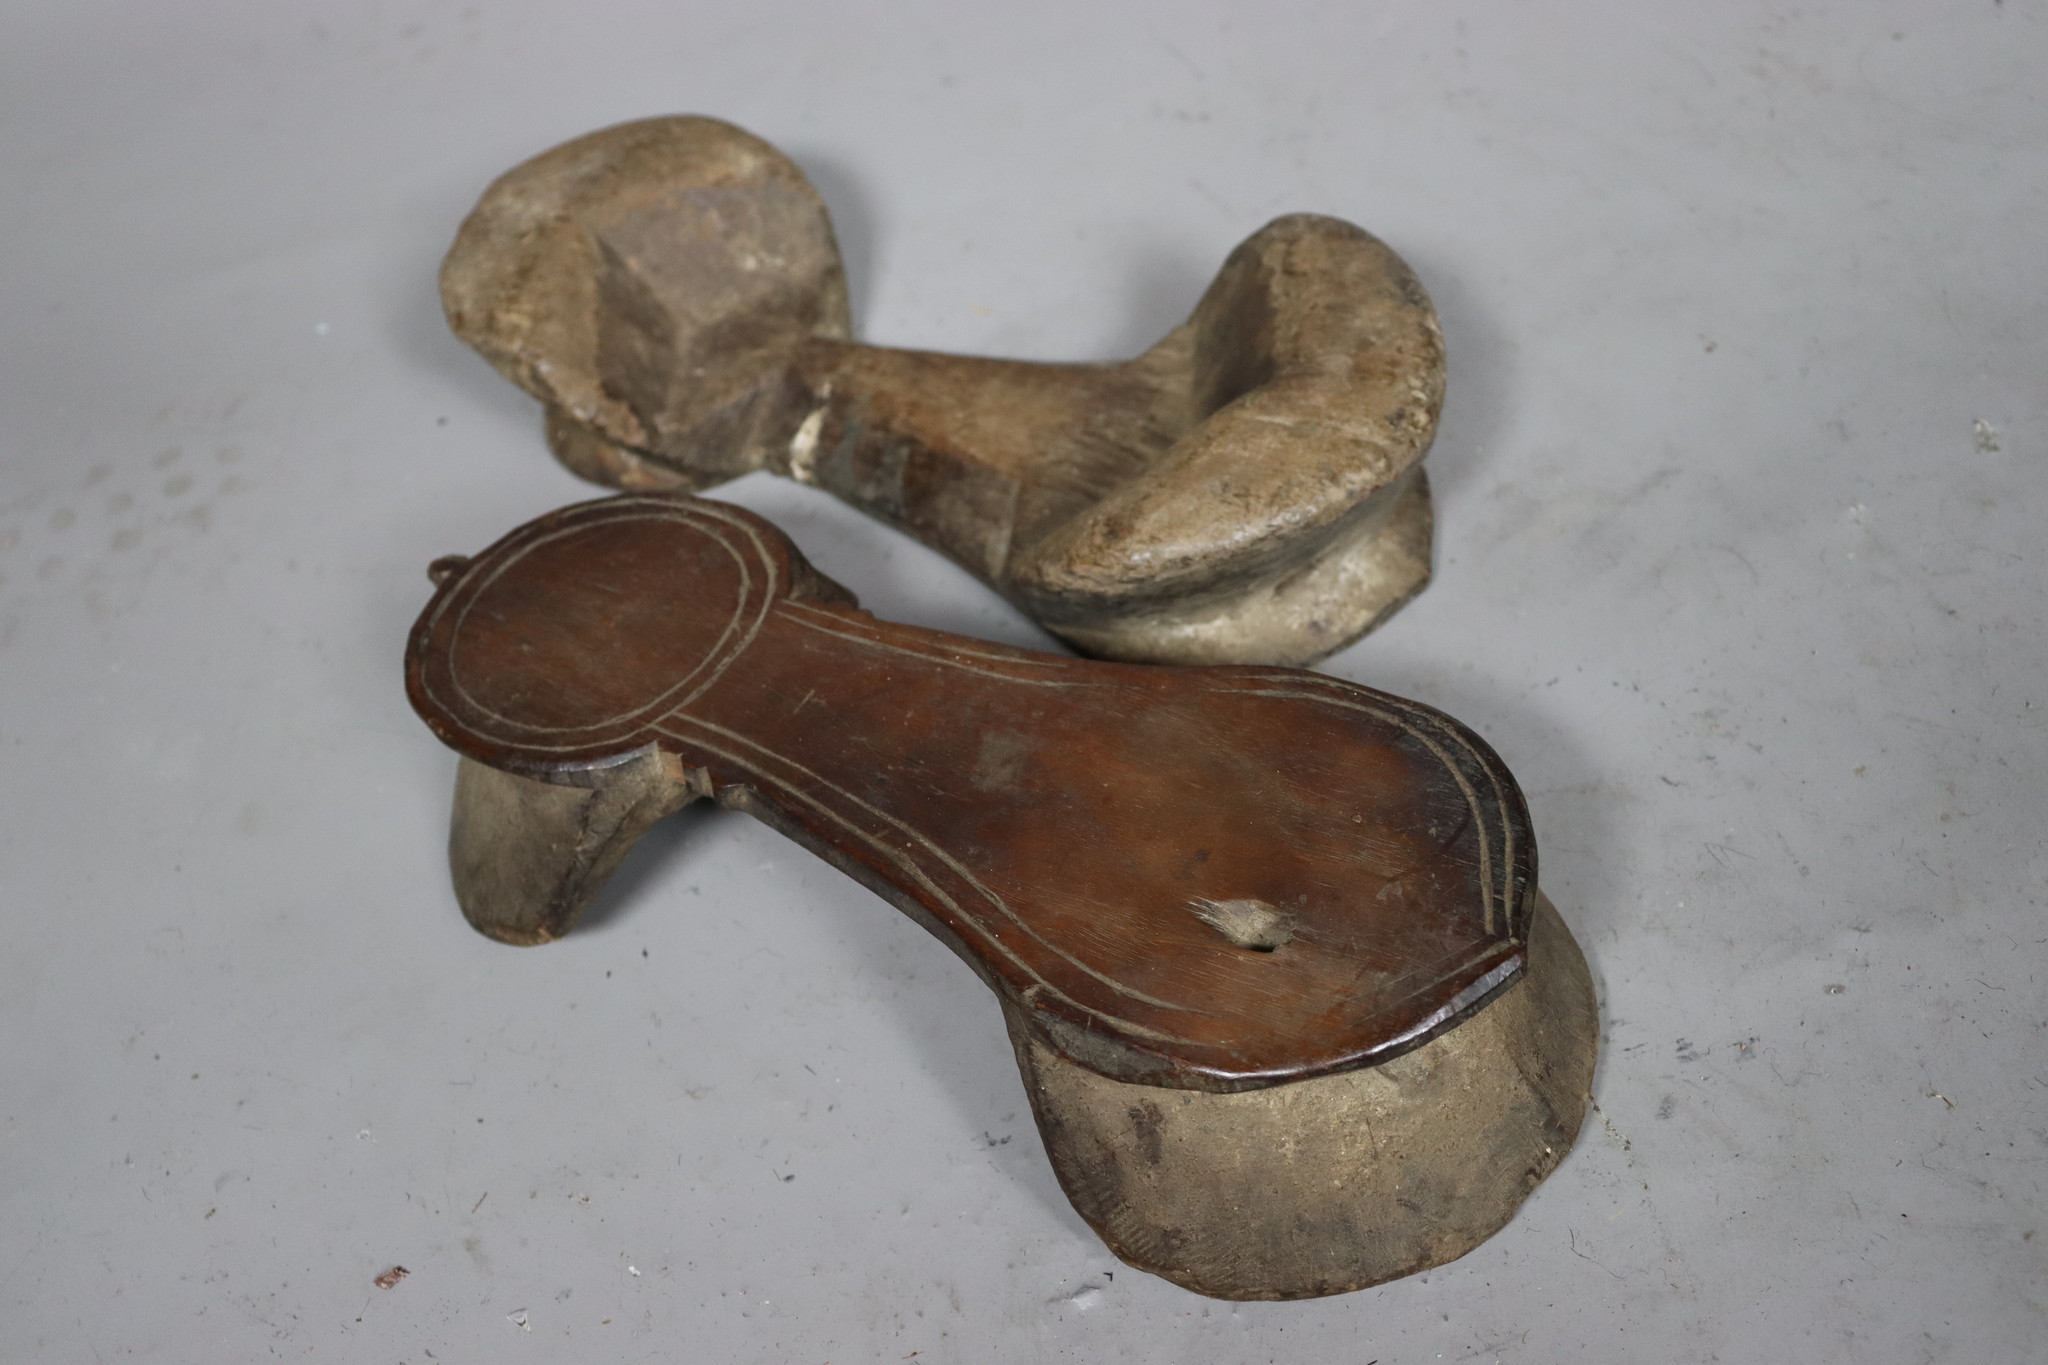 Antique 19th C Pakistan Swat Valley Handmade Wooden Carved  Sandal Nuristan Afghanistan Shoes No:C